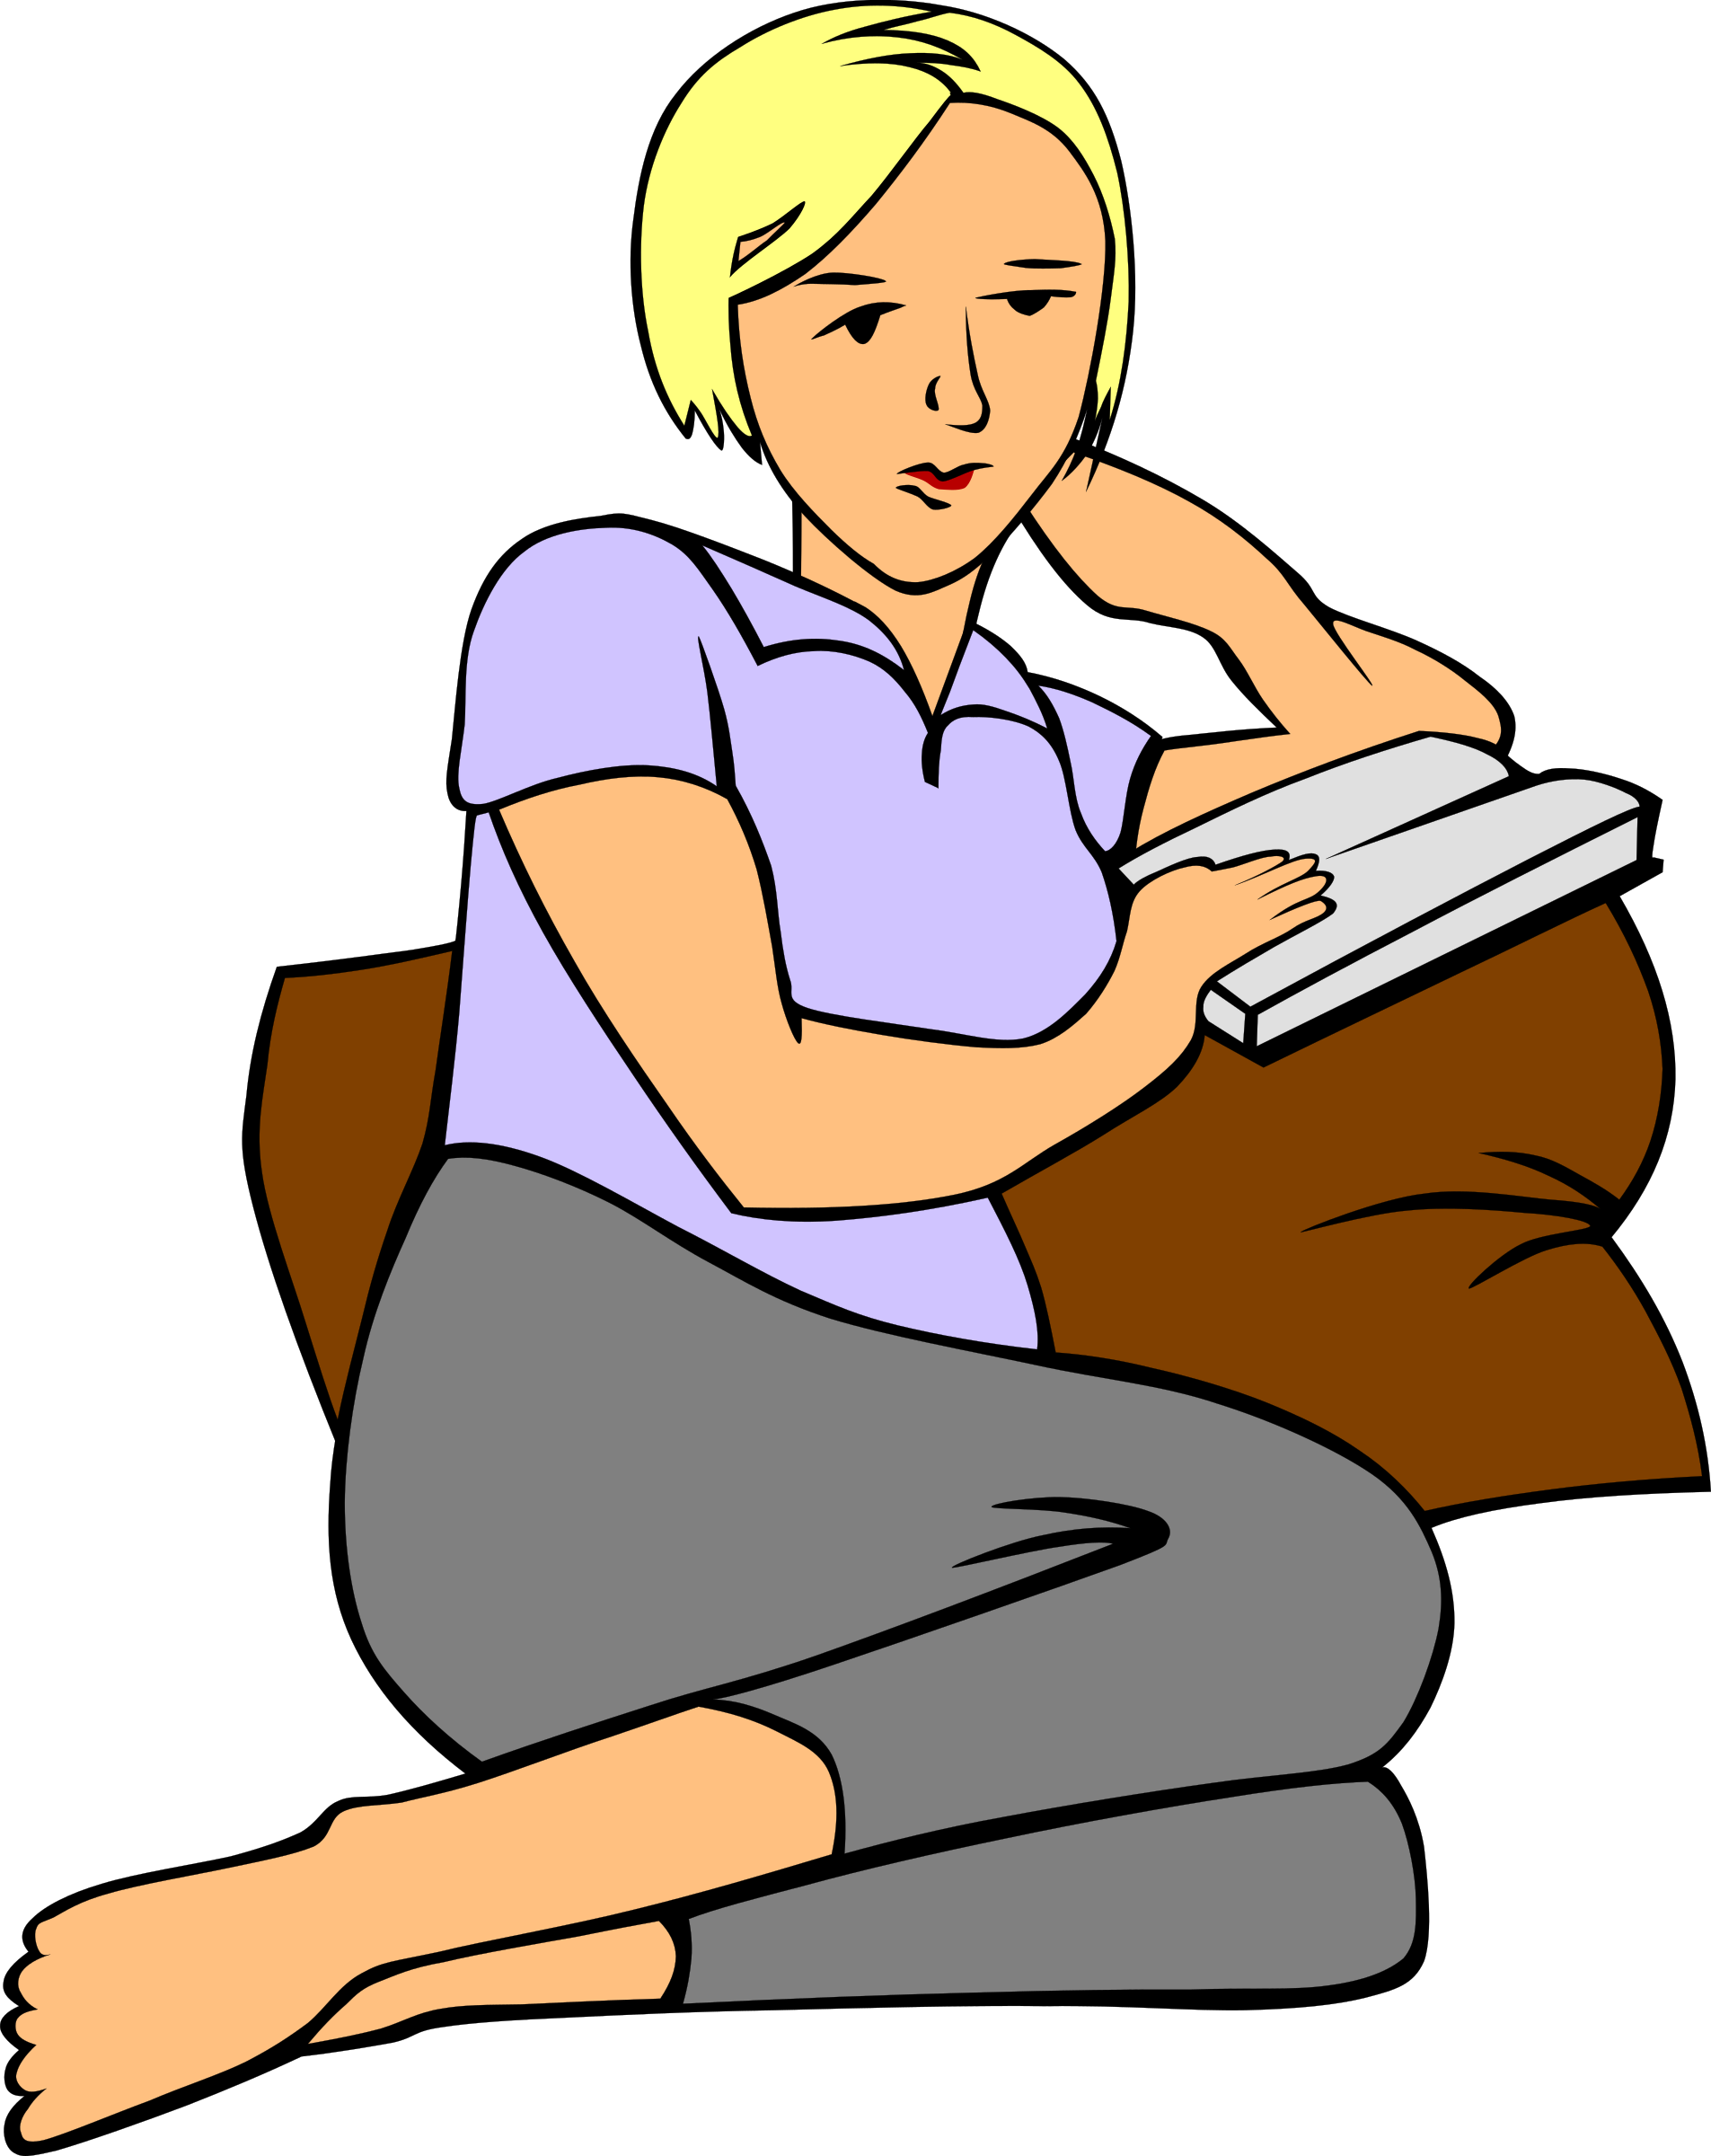 See Here Free Clipart Of Books And Reading Images - Have A Rest Clipart (1905x2400)